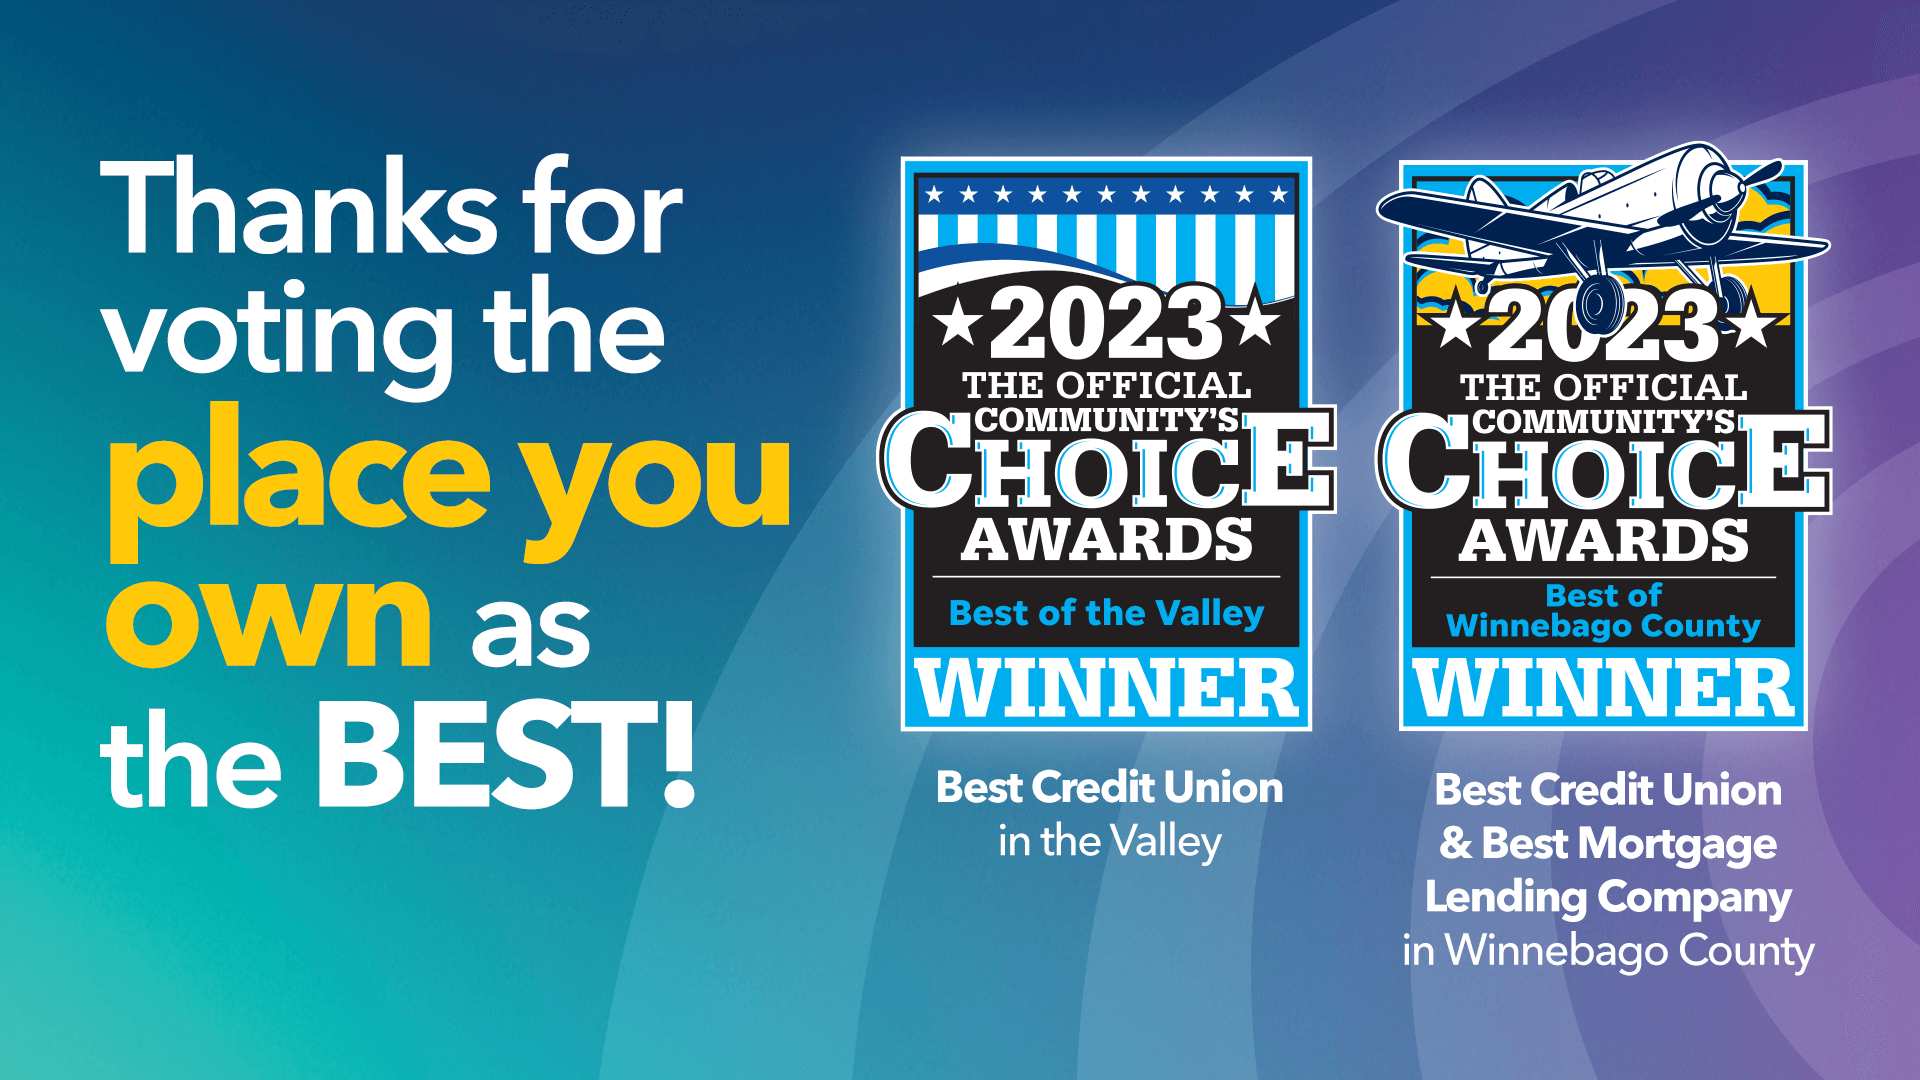 Thank you for voting the place you own as the Best! Logo for Best Credit Union & Best Mortgage Lending Company Award 2023.